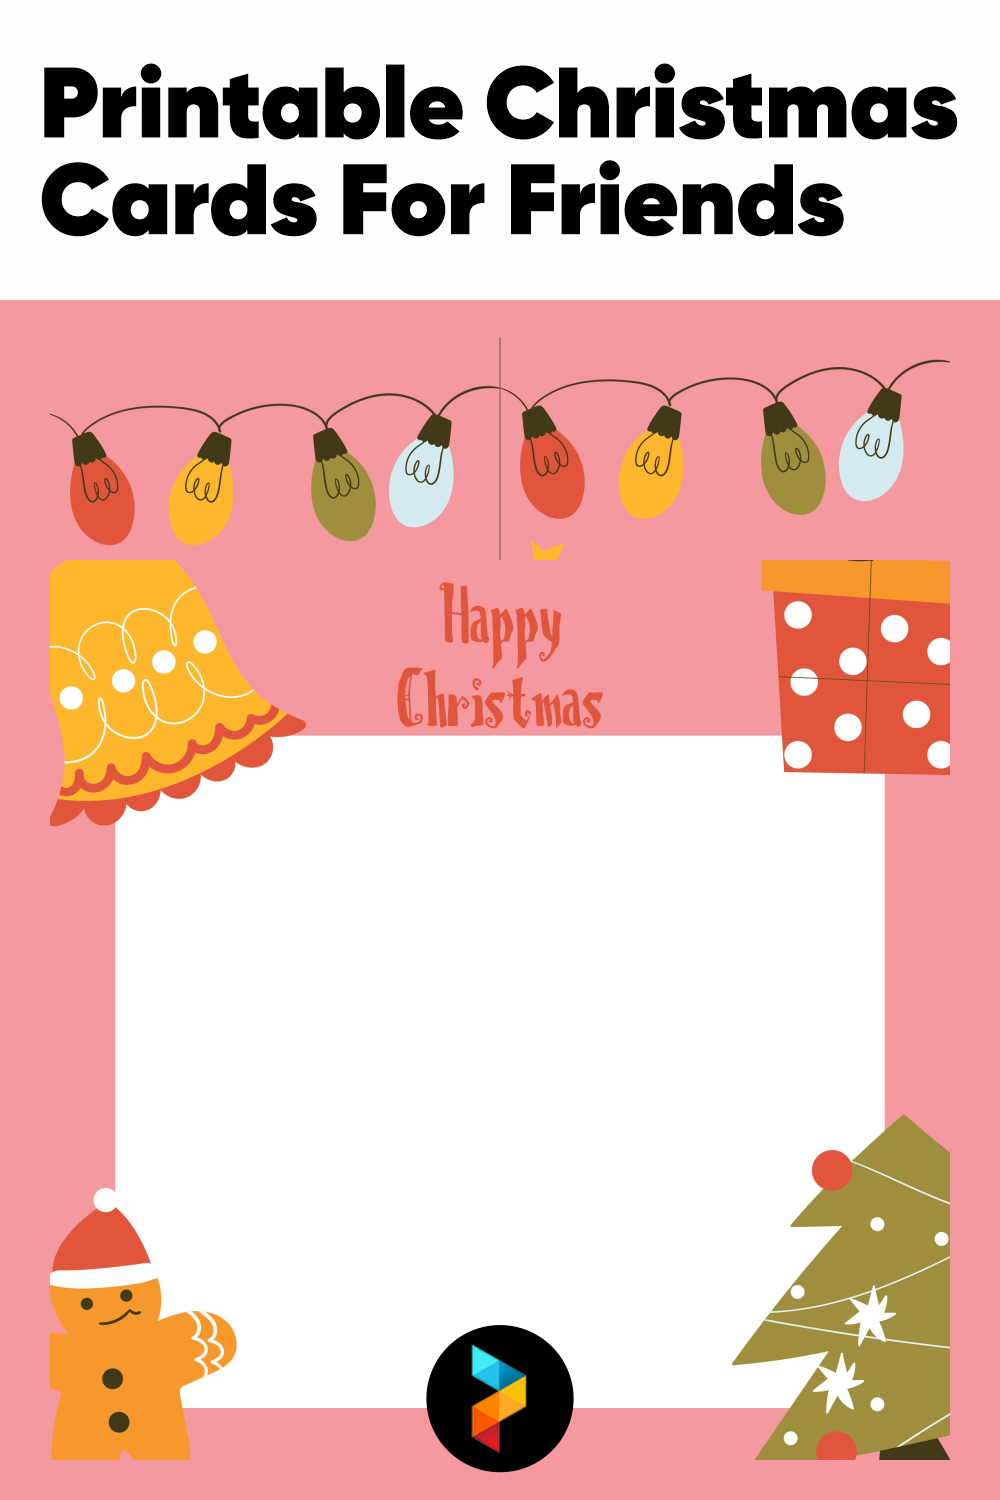 Printable Christmas Cards For Friends